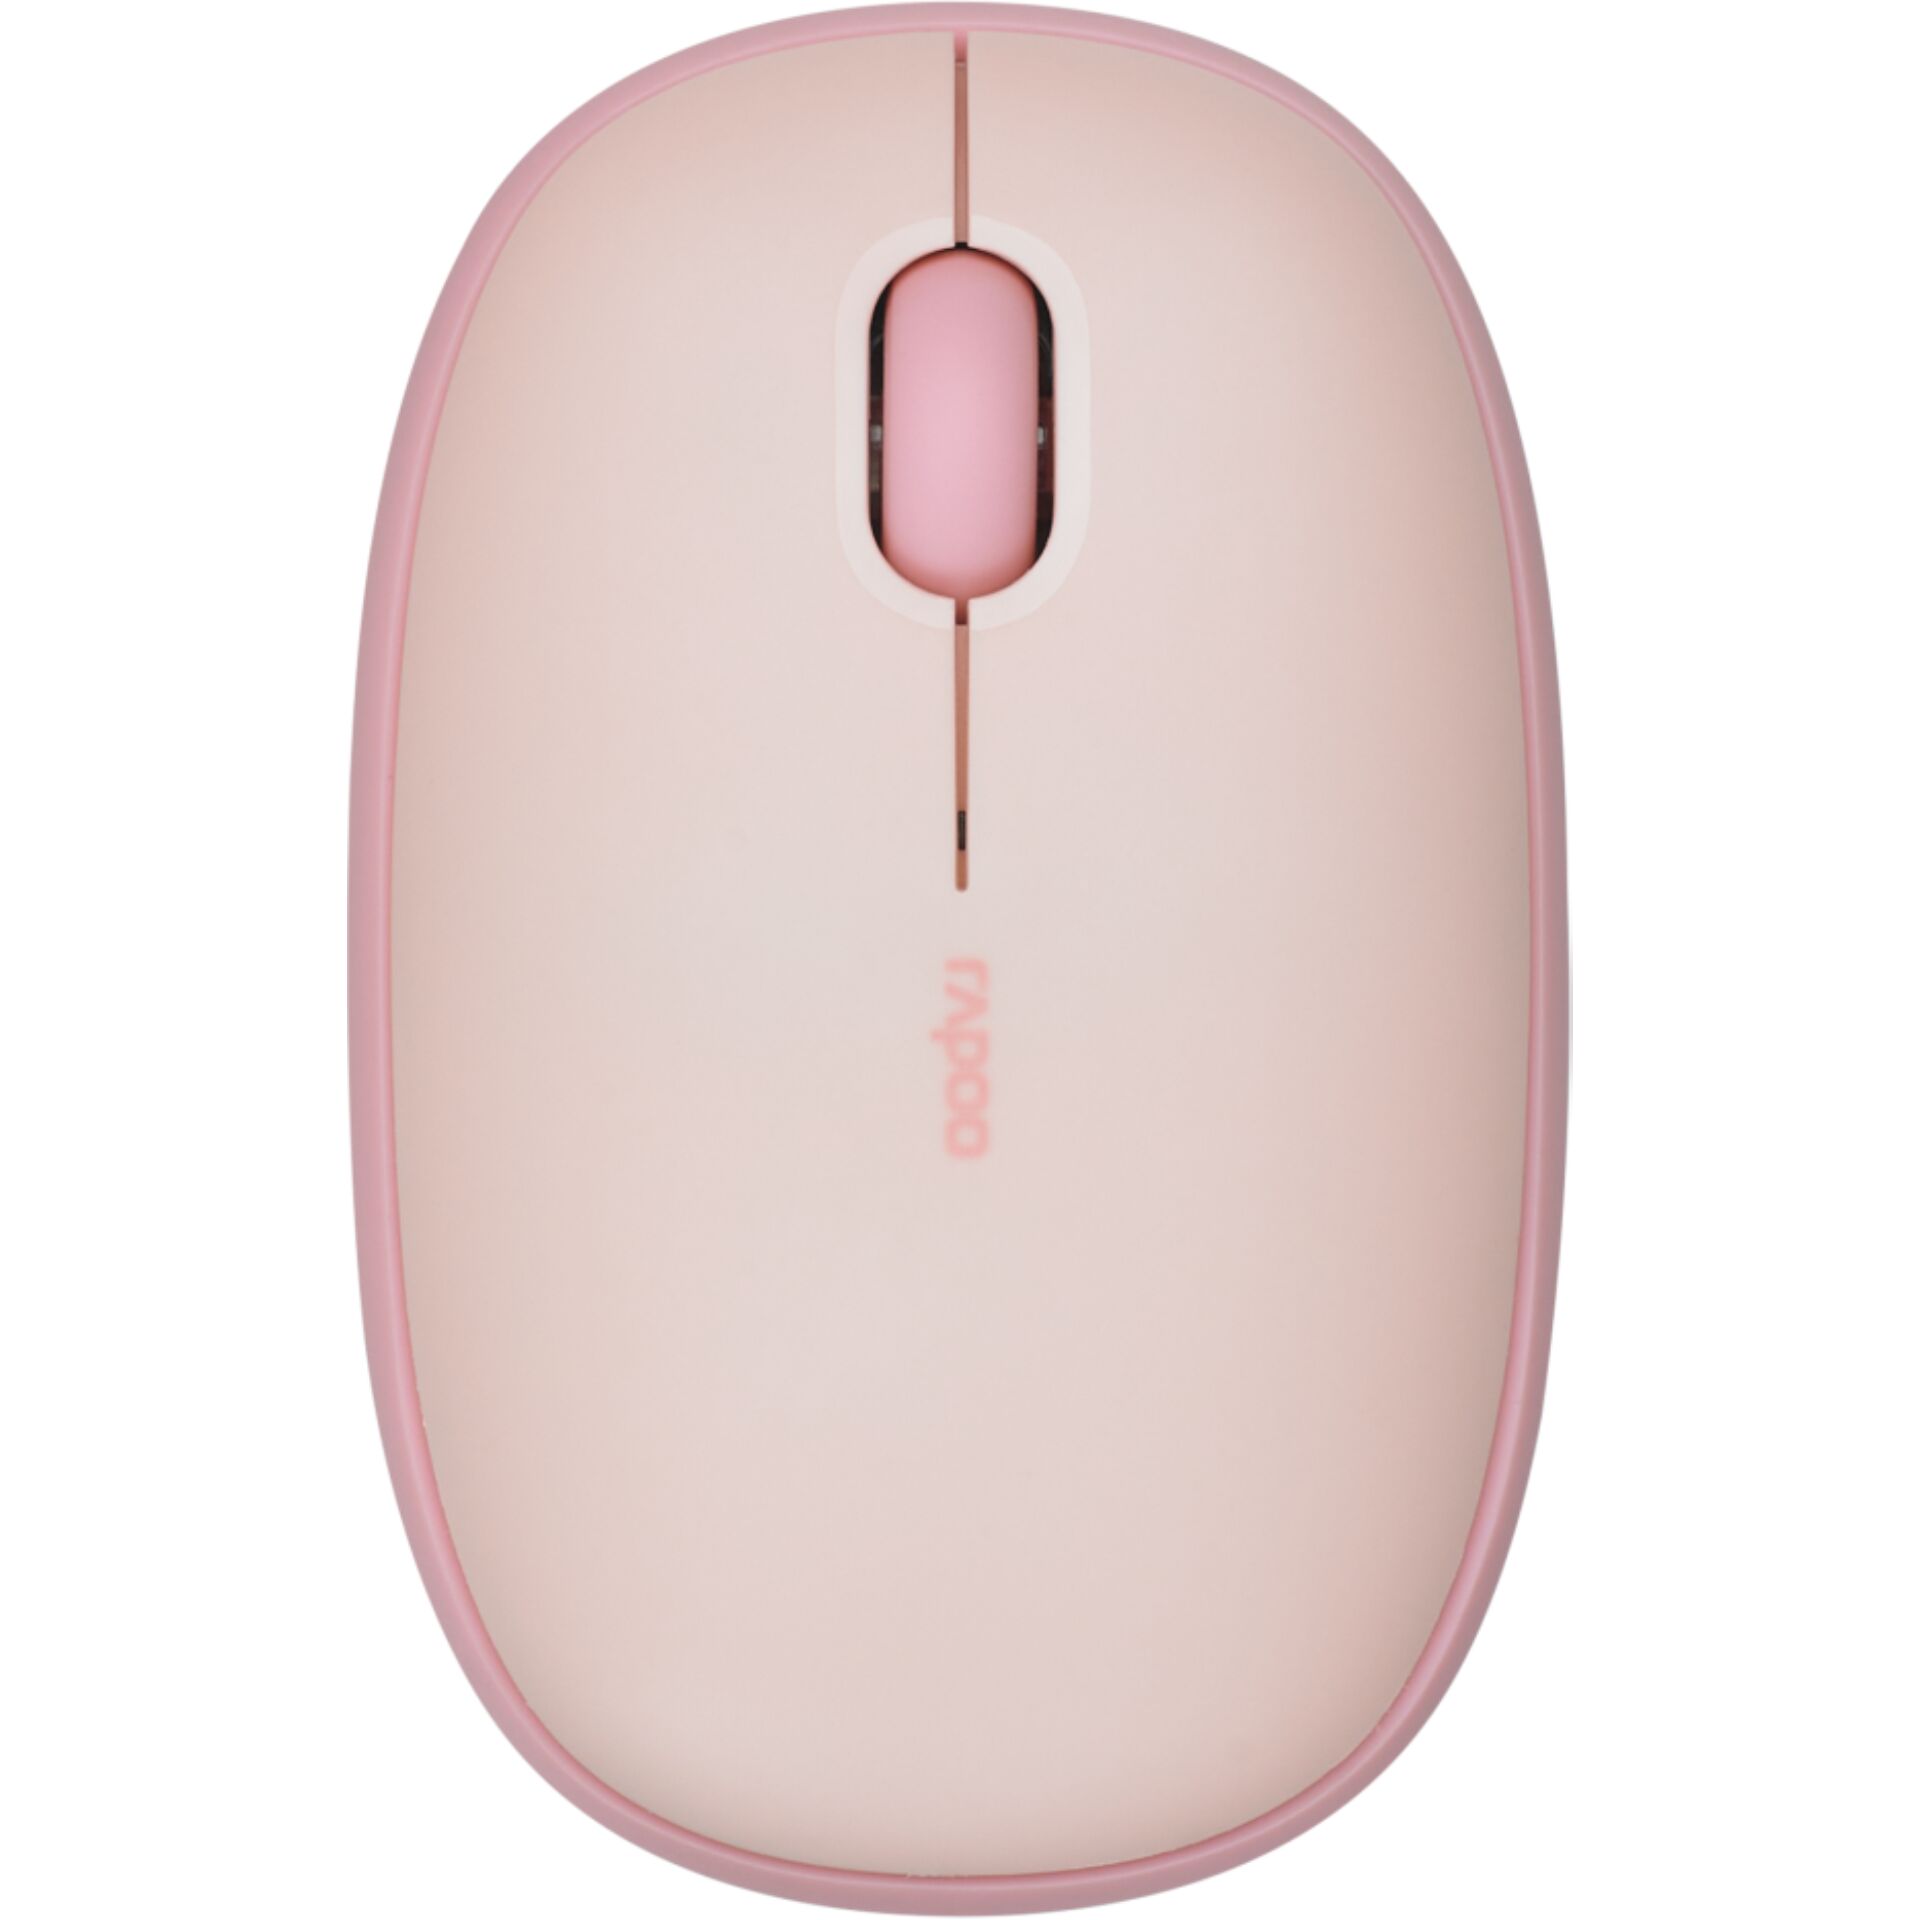 Rapoo M660 Silent Pink Wireless Multi-Mode Mouse